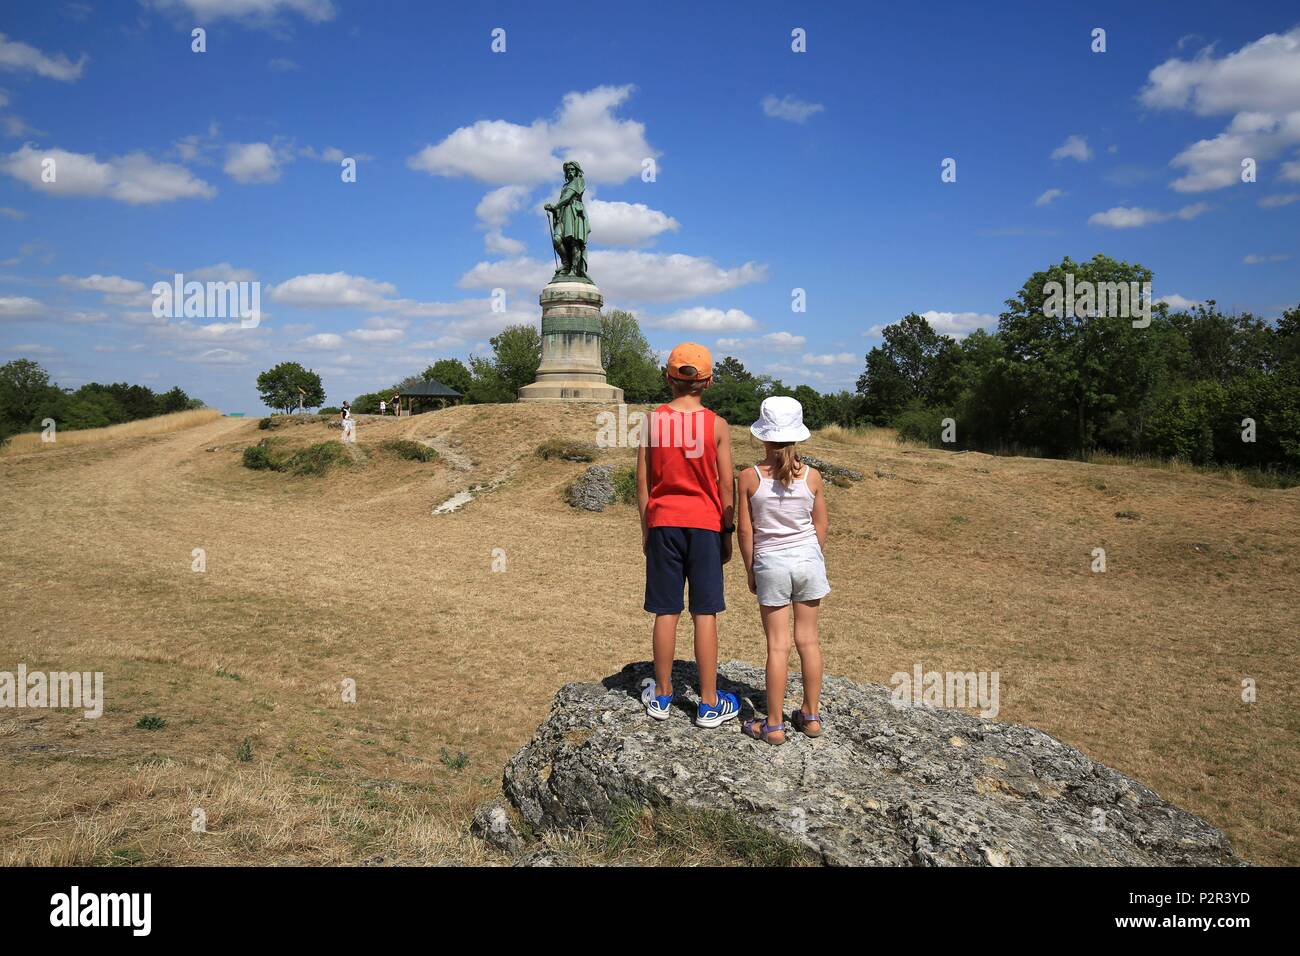 France, Cote d'Or, Alise Sainte Reine, children admiring the statue in memory of Vercingetorix by sculptor Aimé Millet at the top of Mont Auxois Stock Photo